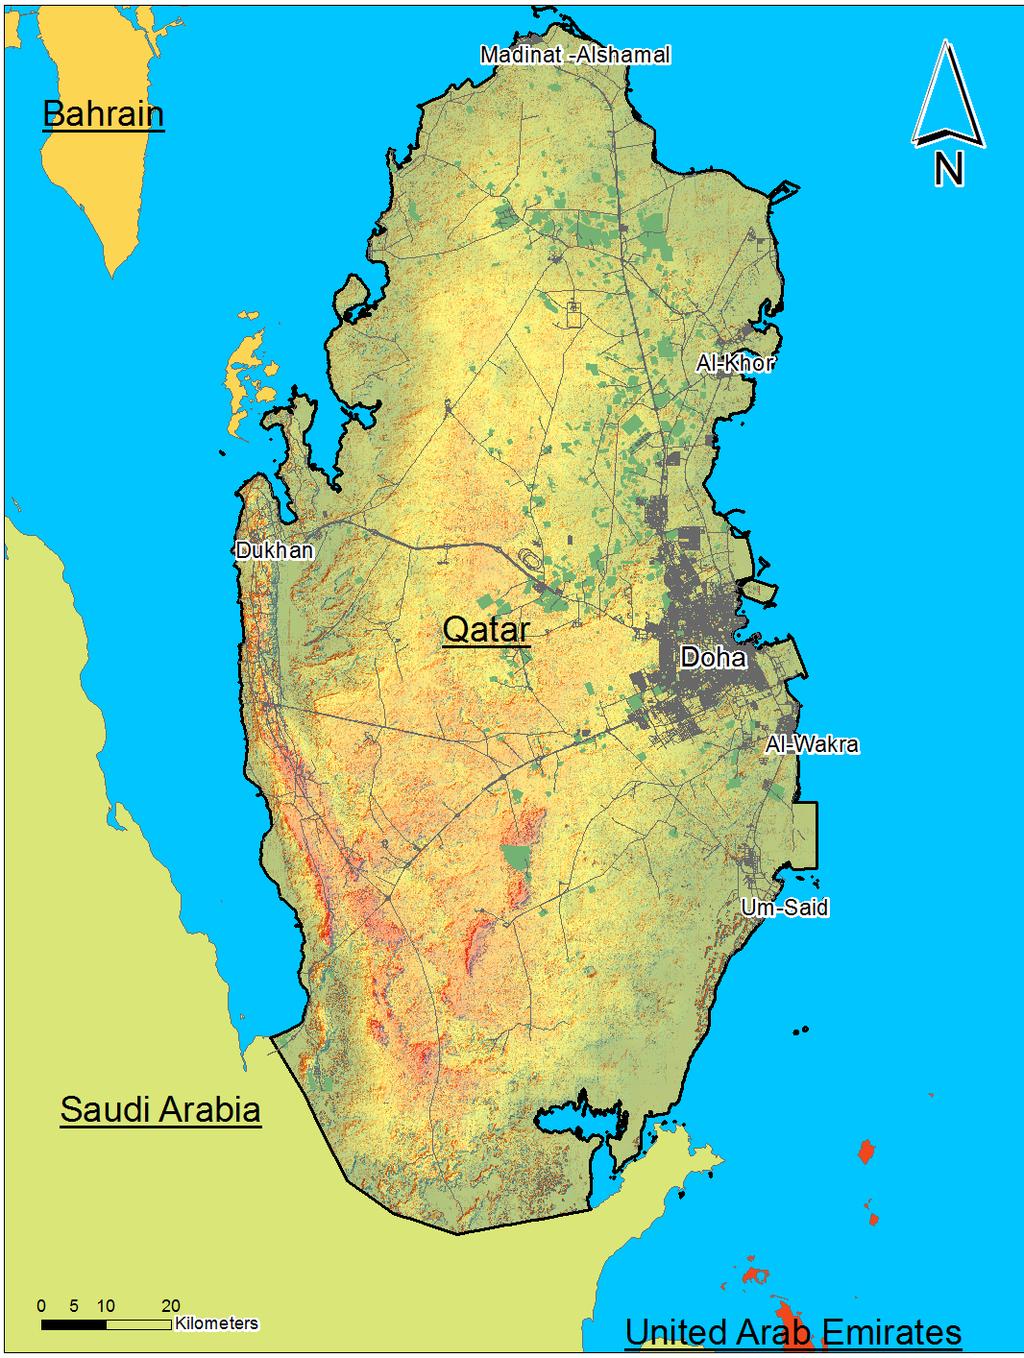 Baalousha, Estimation of Natural Groundwater Recharge in Qatar Using GIS 1. INTRODUCTION Qatar is an arid country located in the eastern part of the Arabian Peninsula.